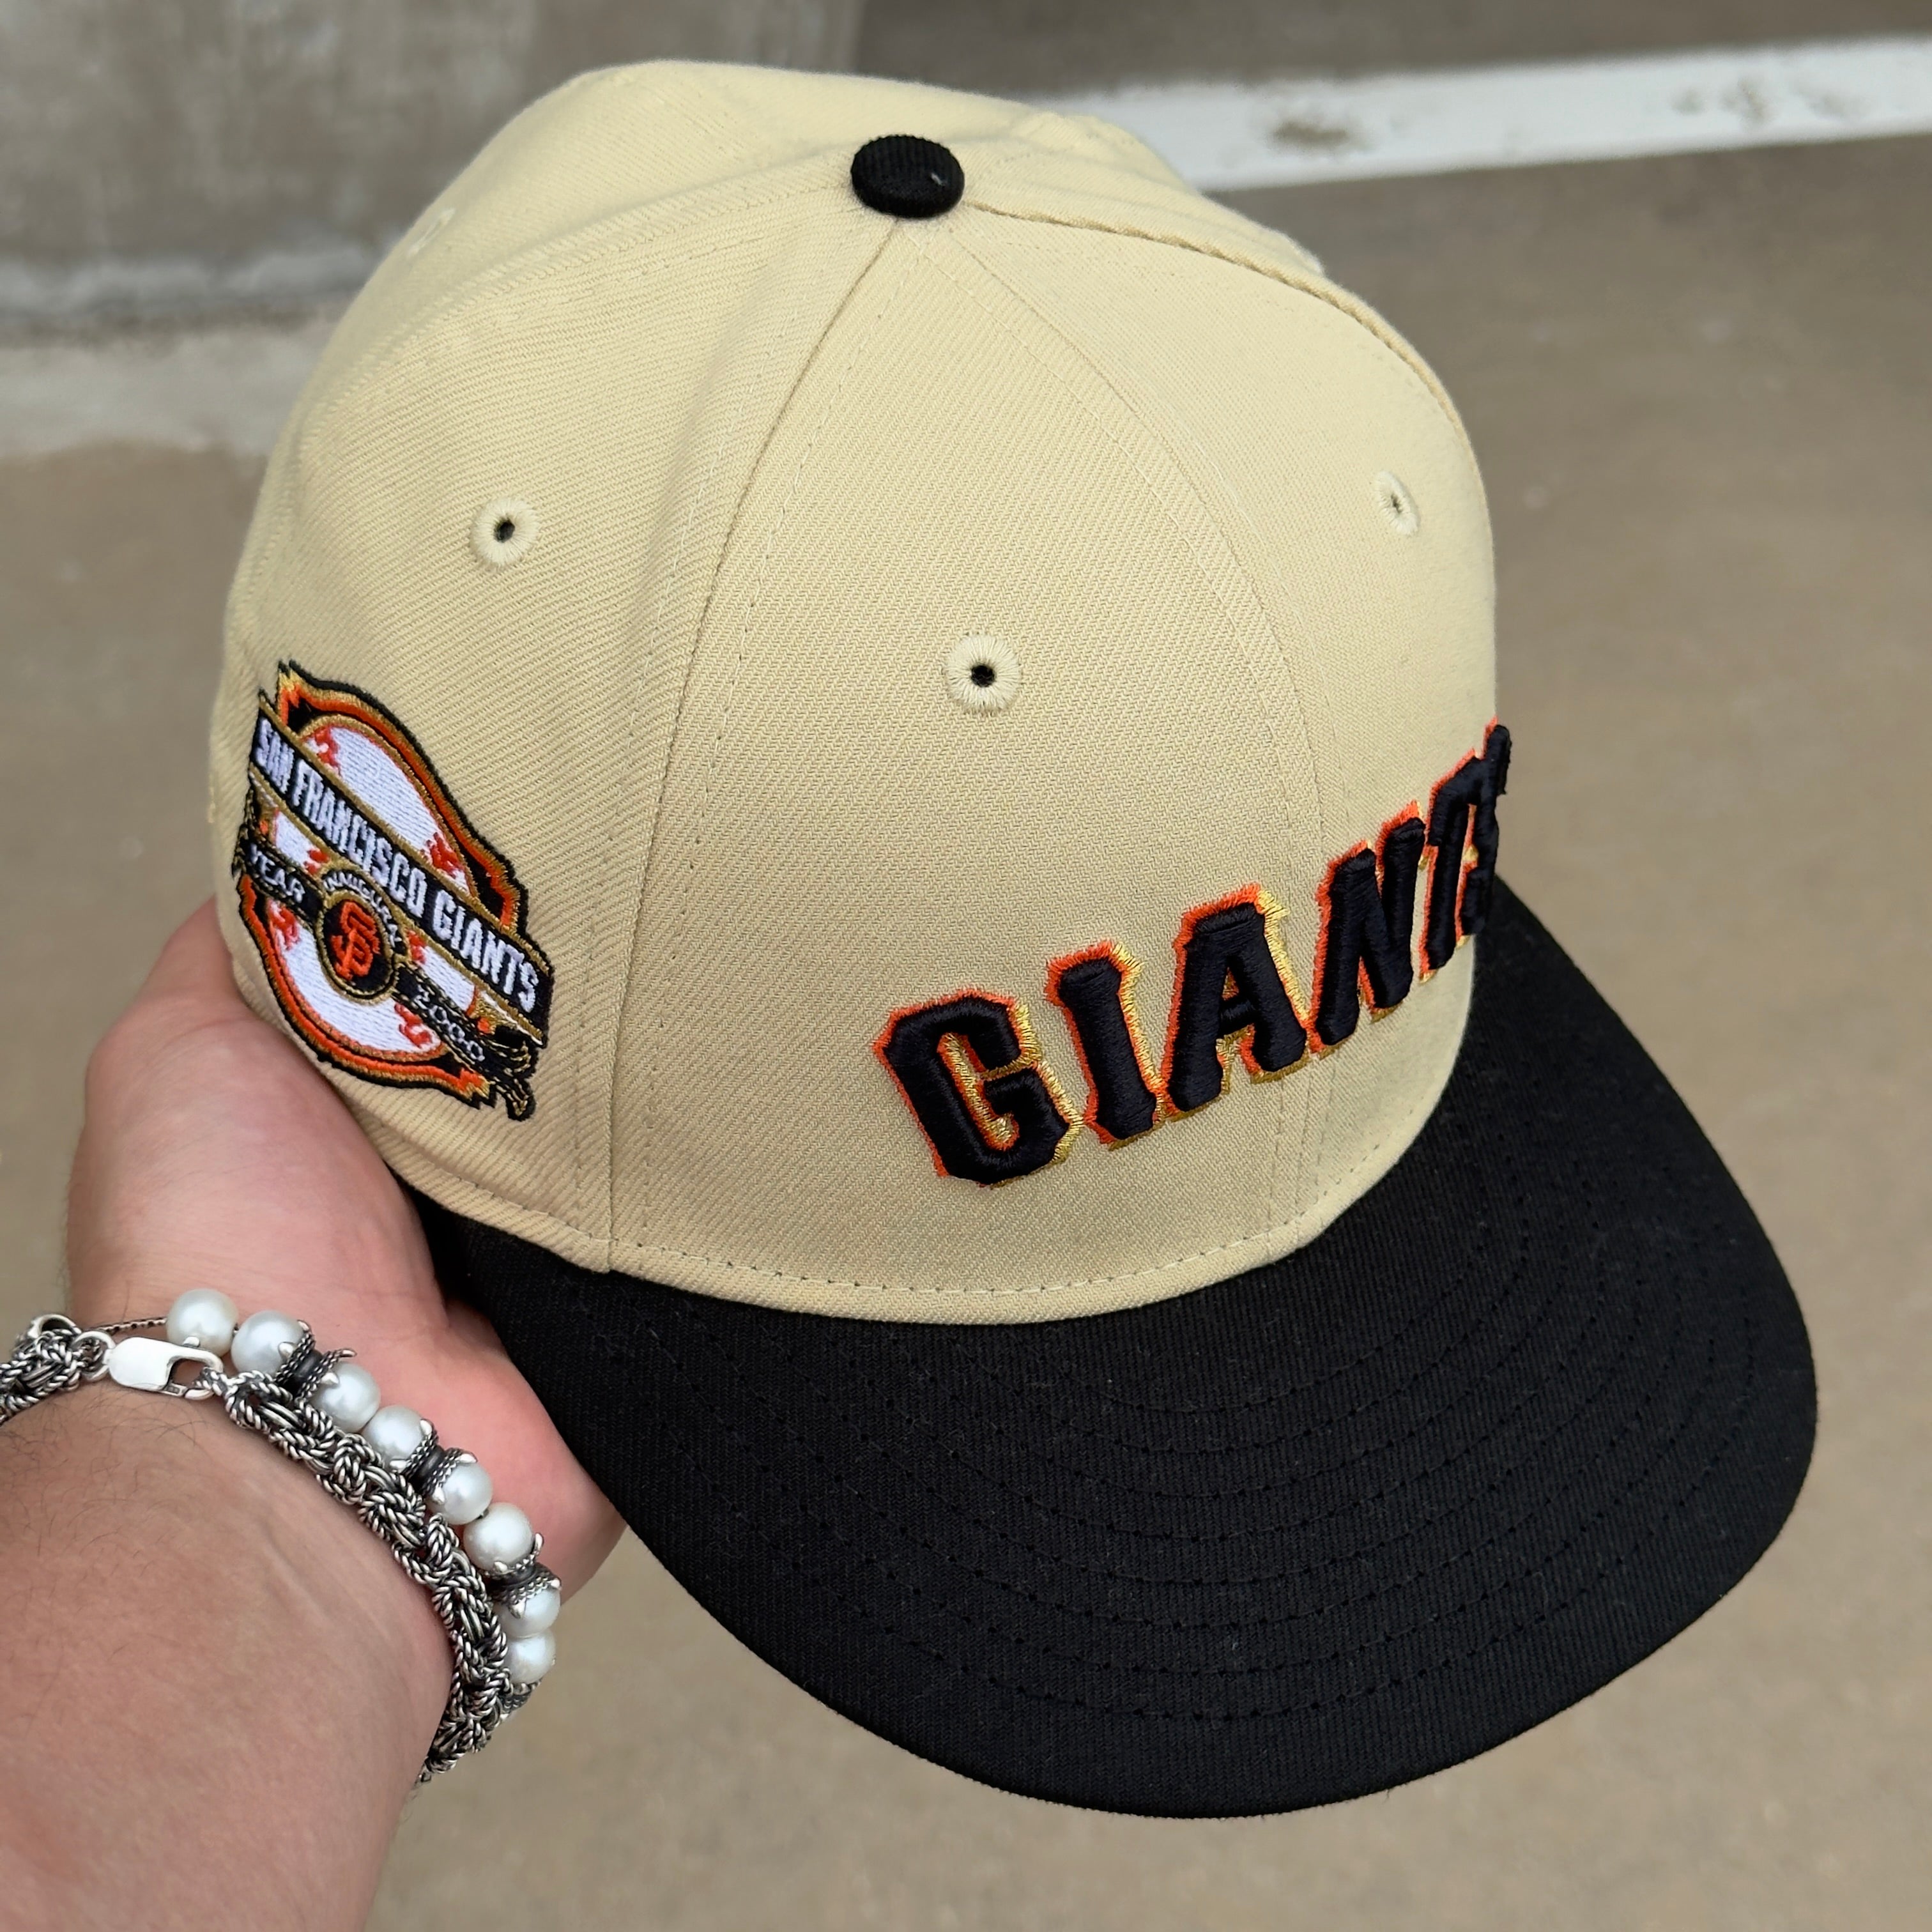 1/8 USED Gold San Francisco Giants Year 2000 59fifty New Era Fitted Hat Cap